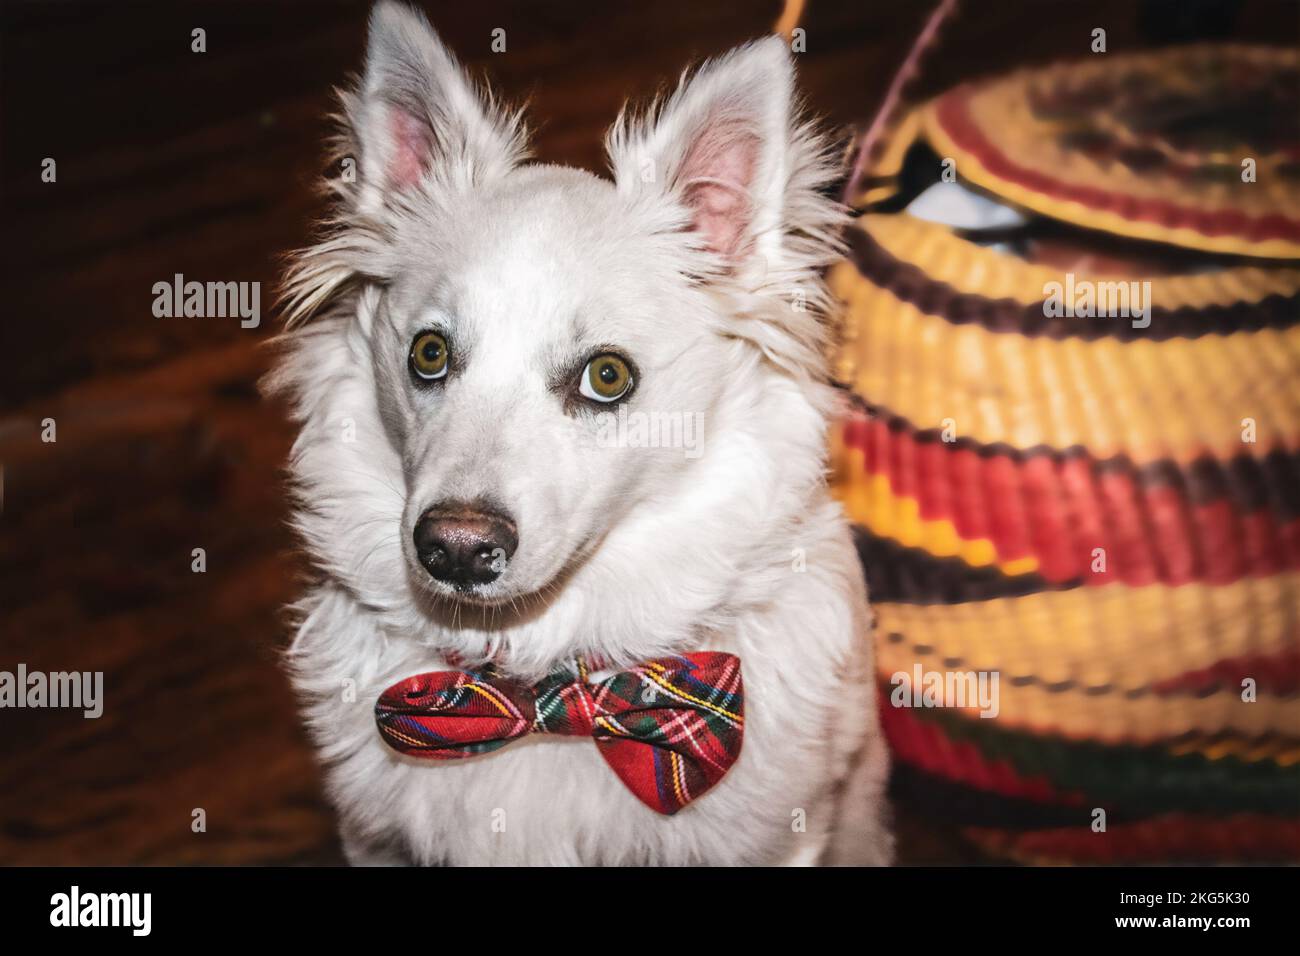 Handsome young white dog - American Eskimo - Spritz with red plaid bow tie looking at camera with basket in dark blurred background Stock Photo